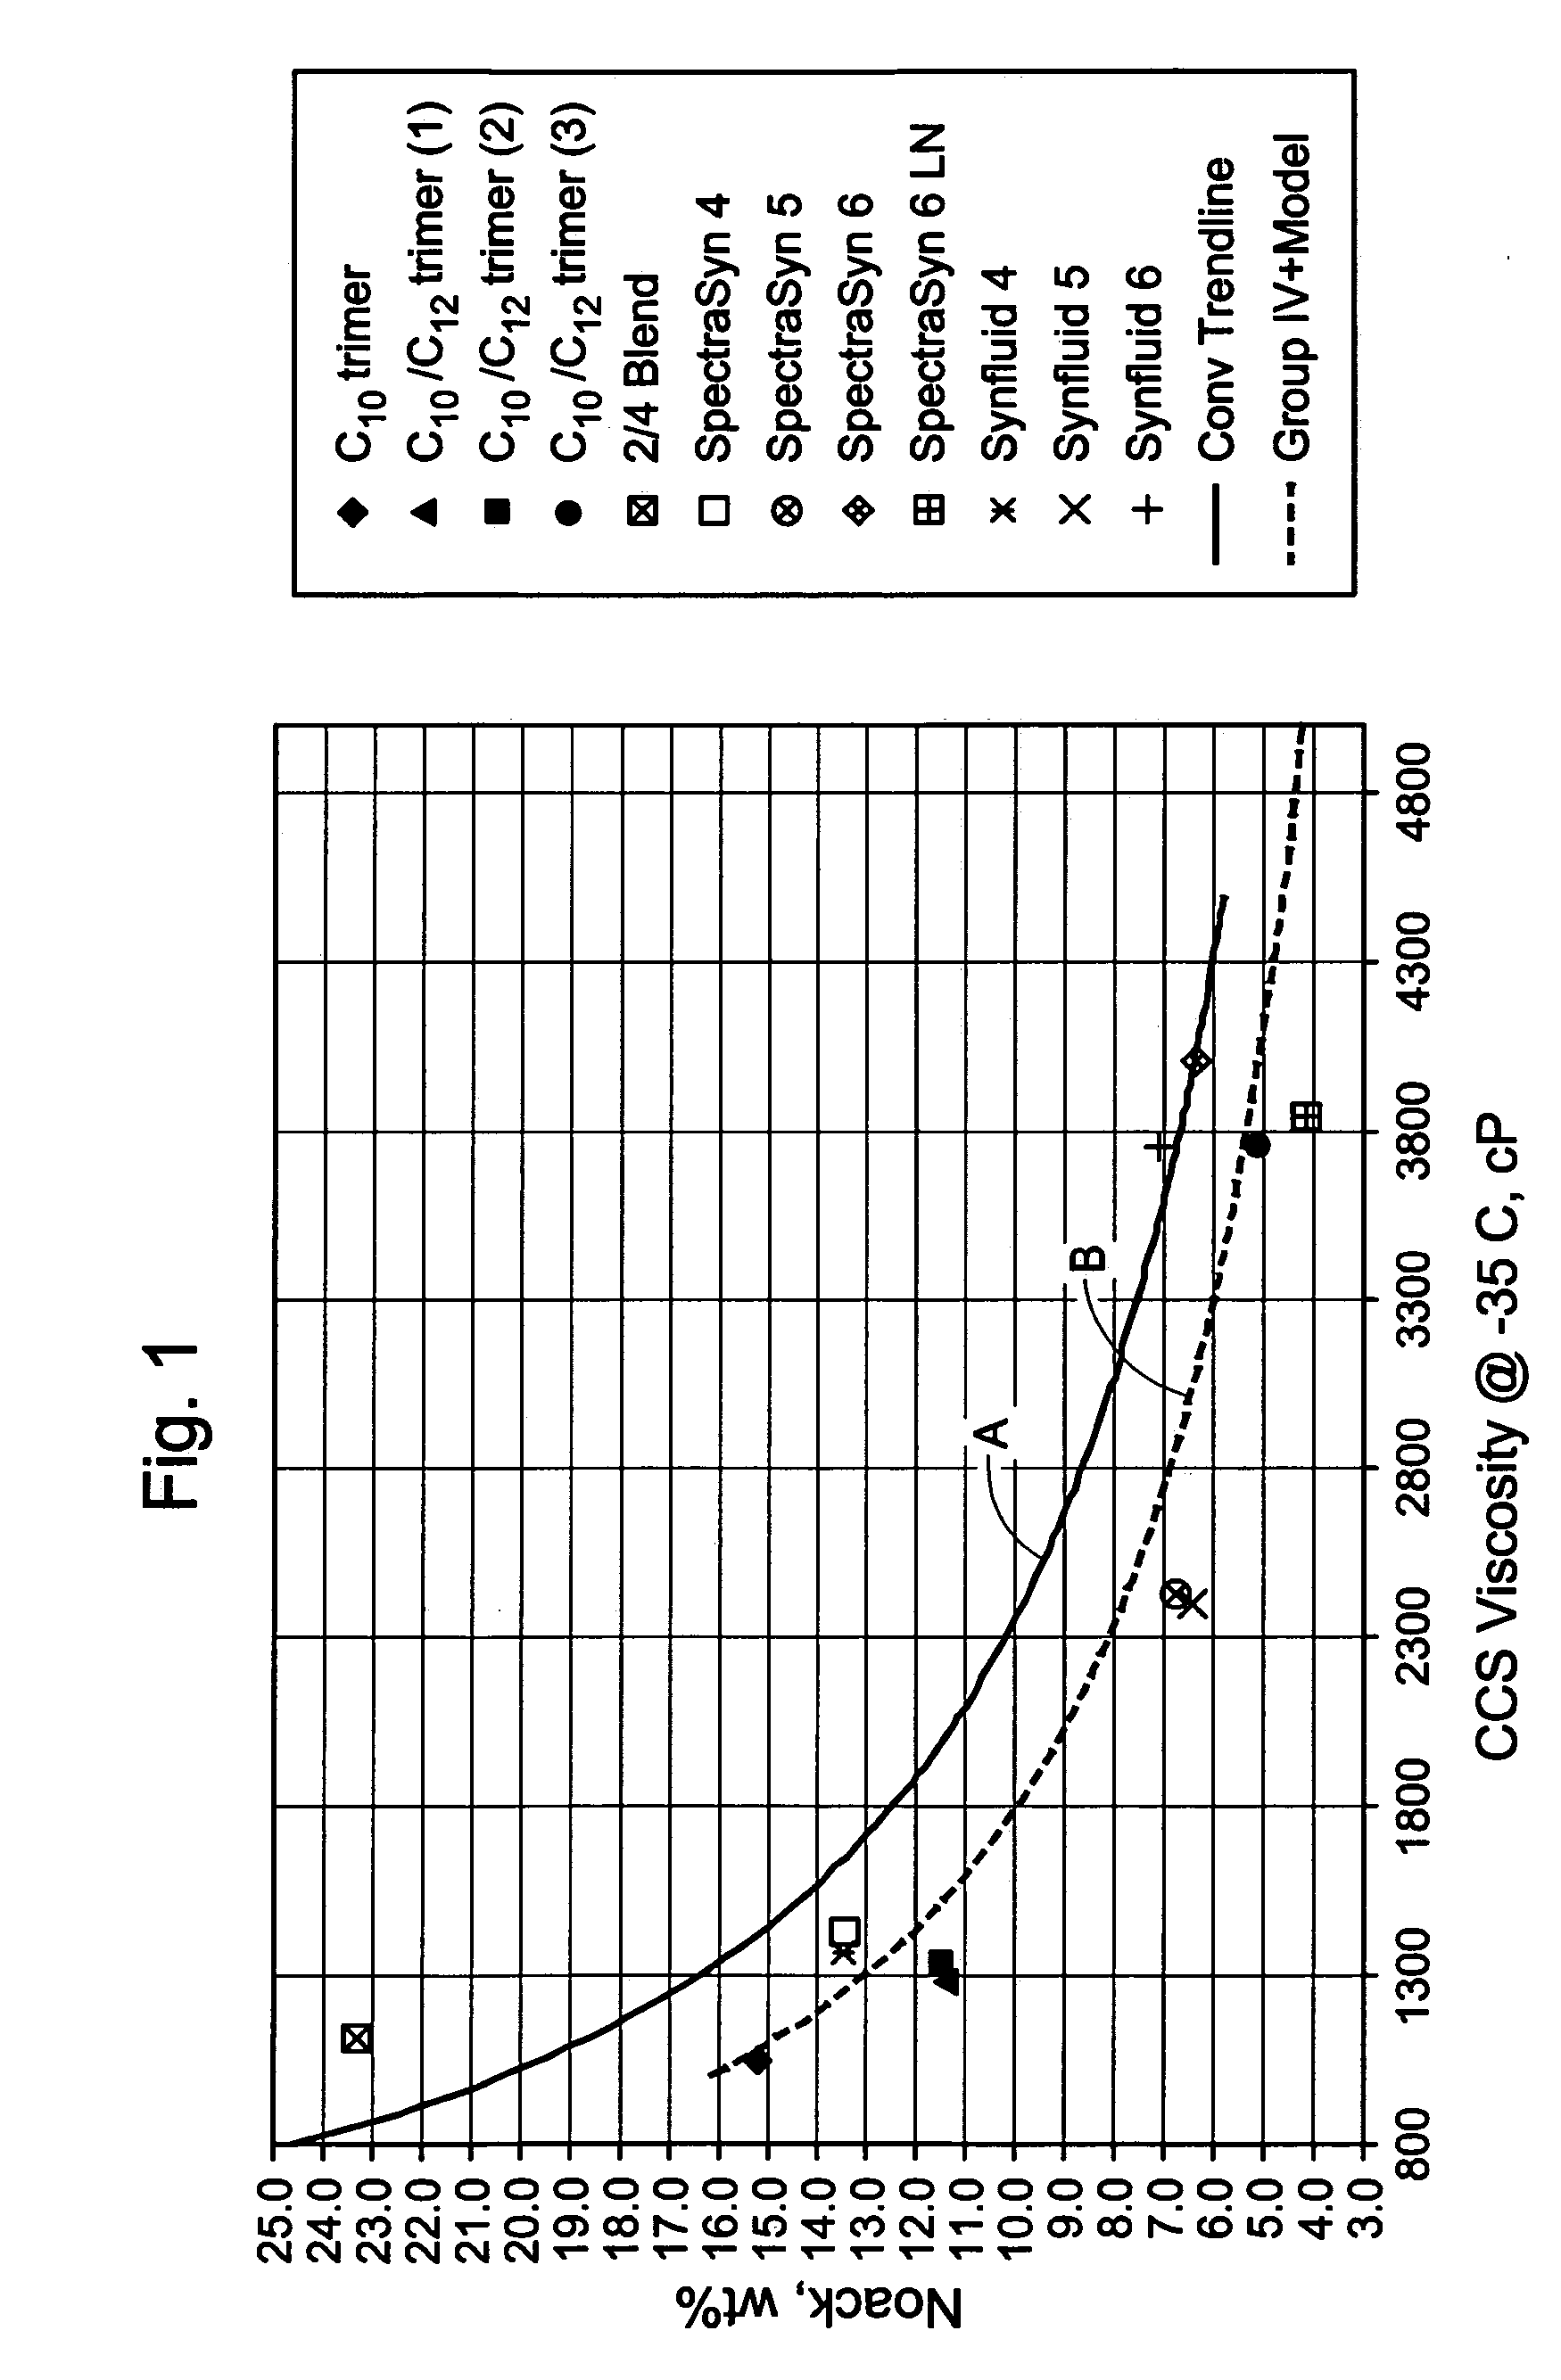 Blend comprising group III and group IV basestocks